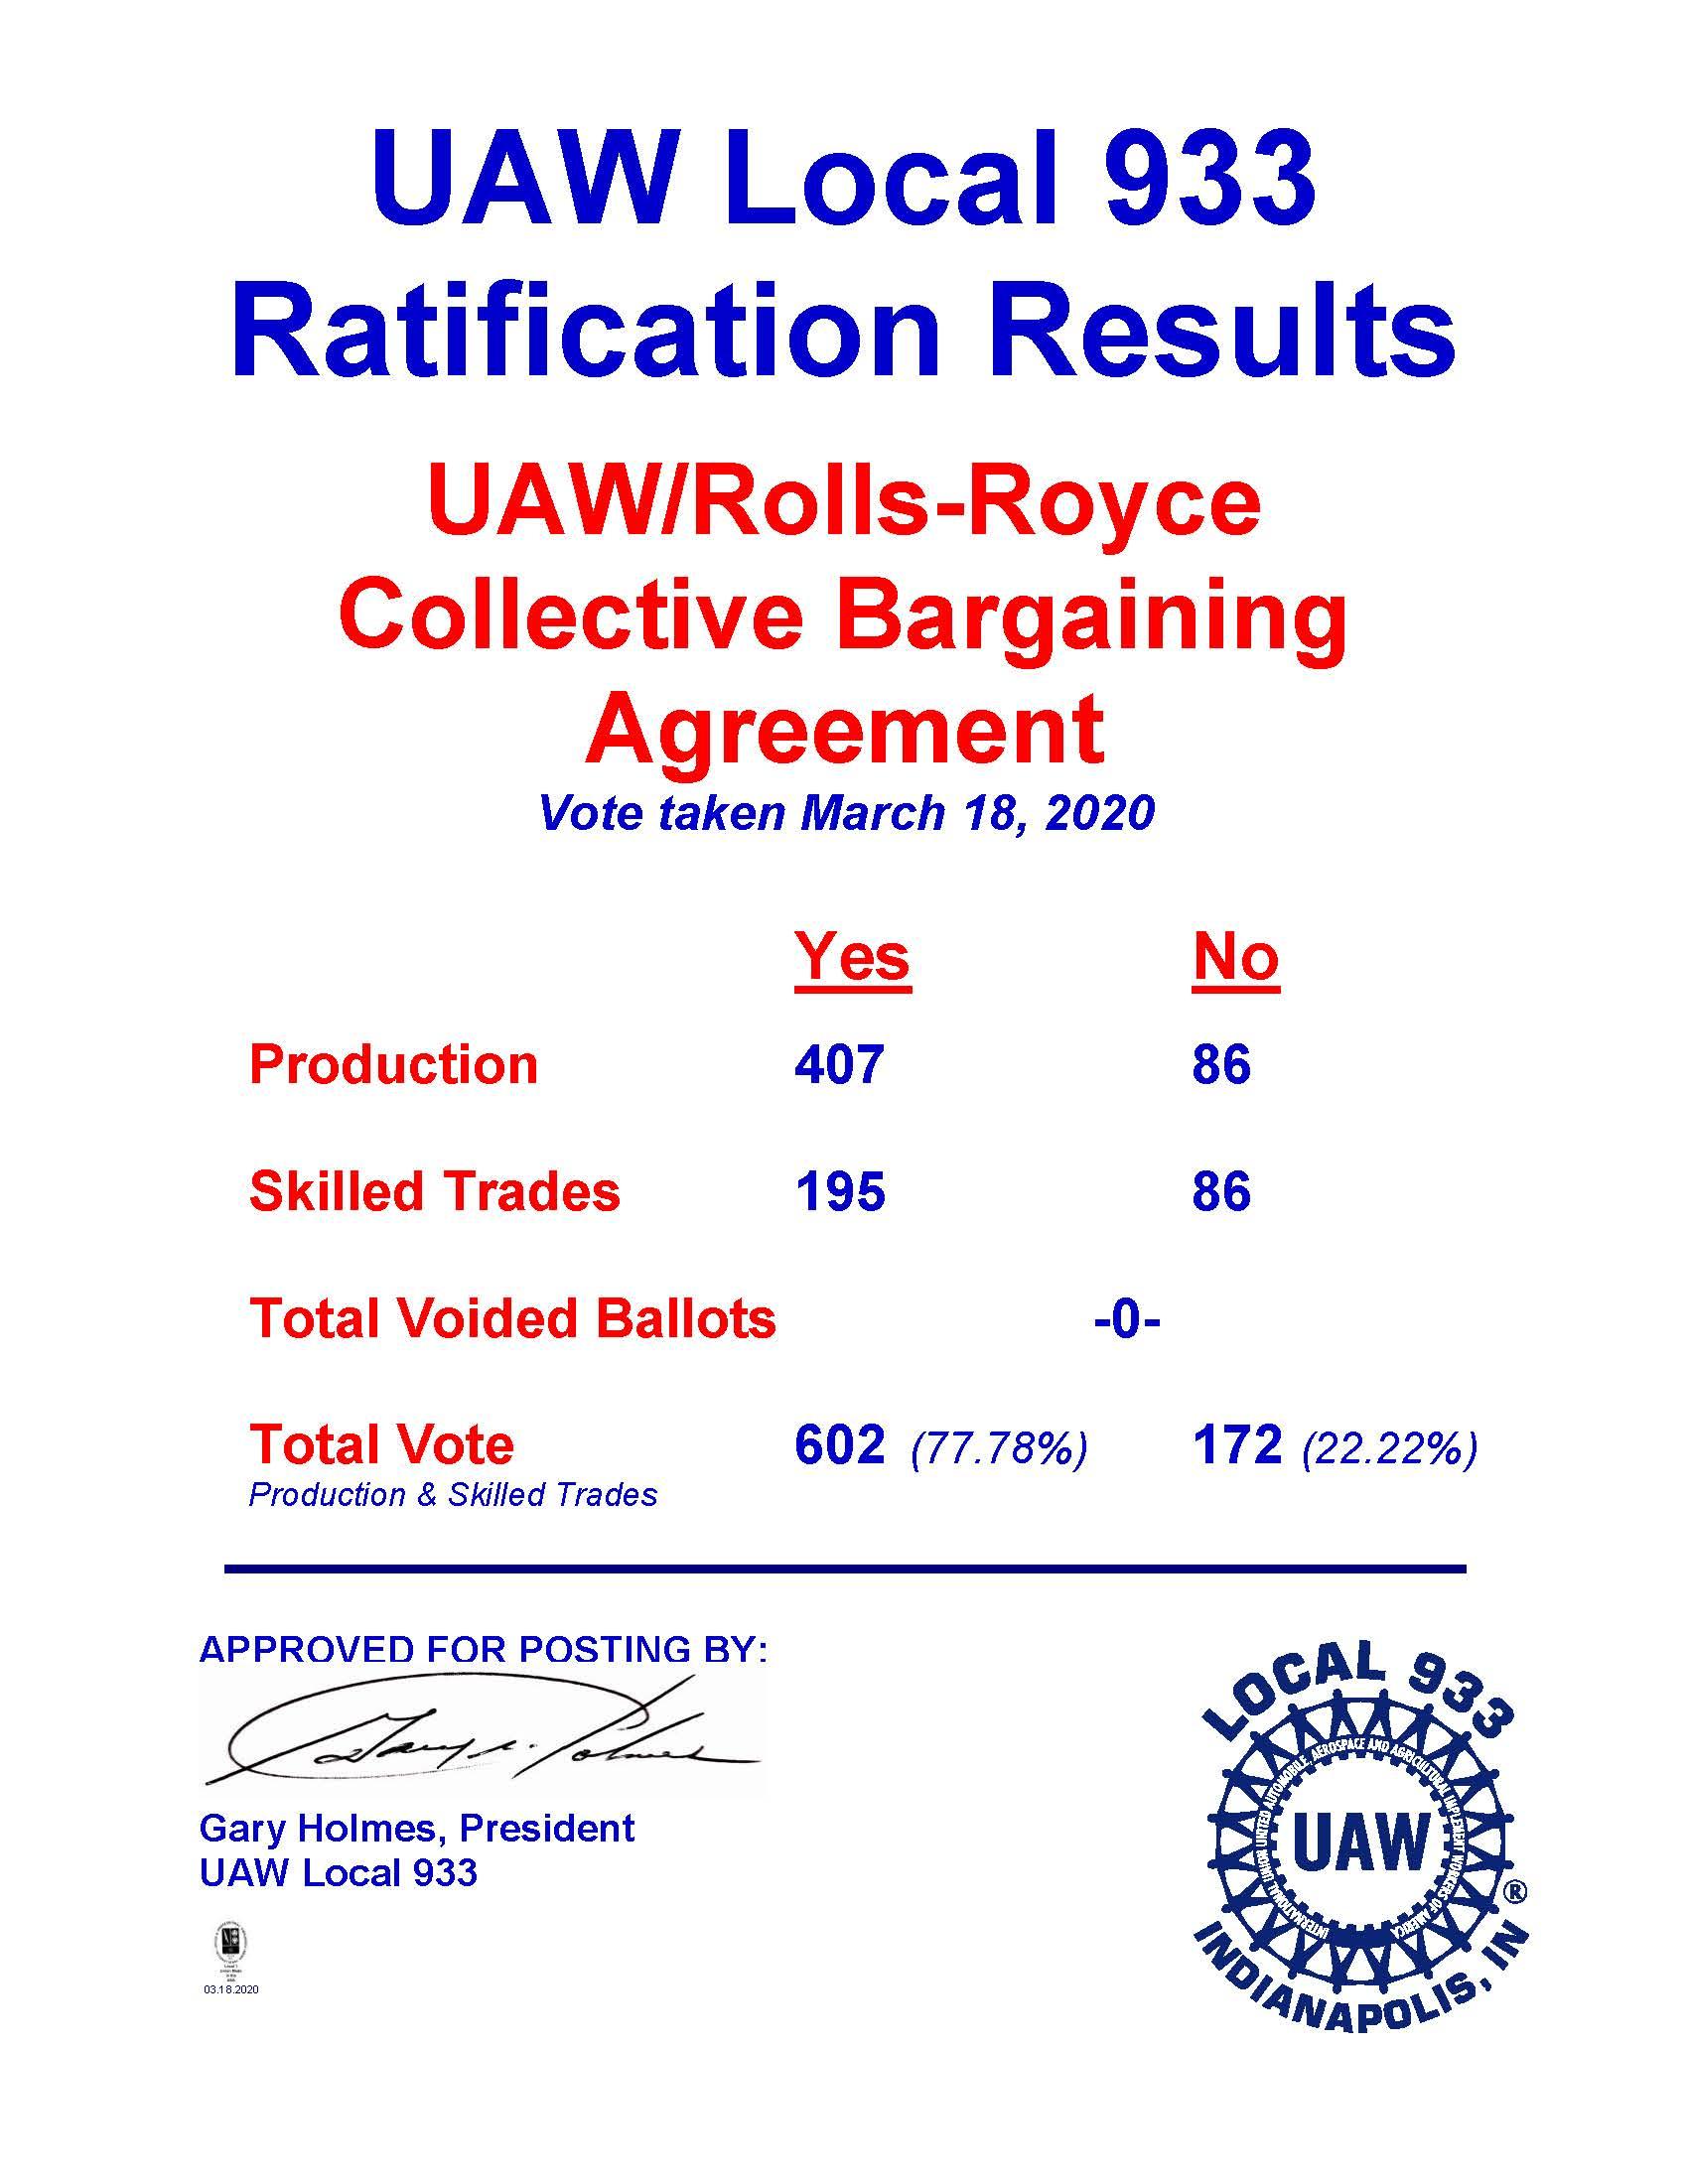 UAW Local 933/RR Ratification vote results UAW Local 933